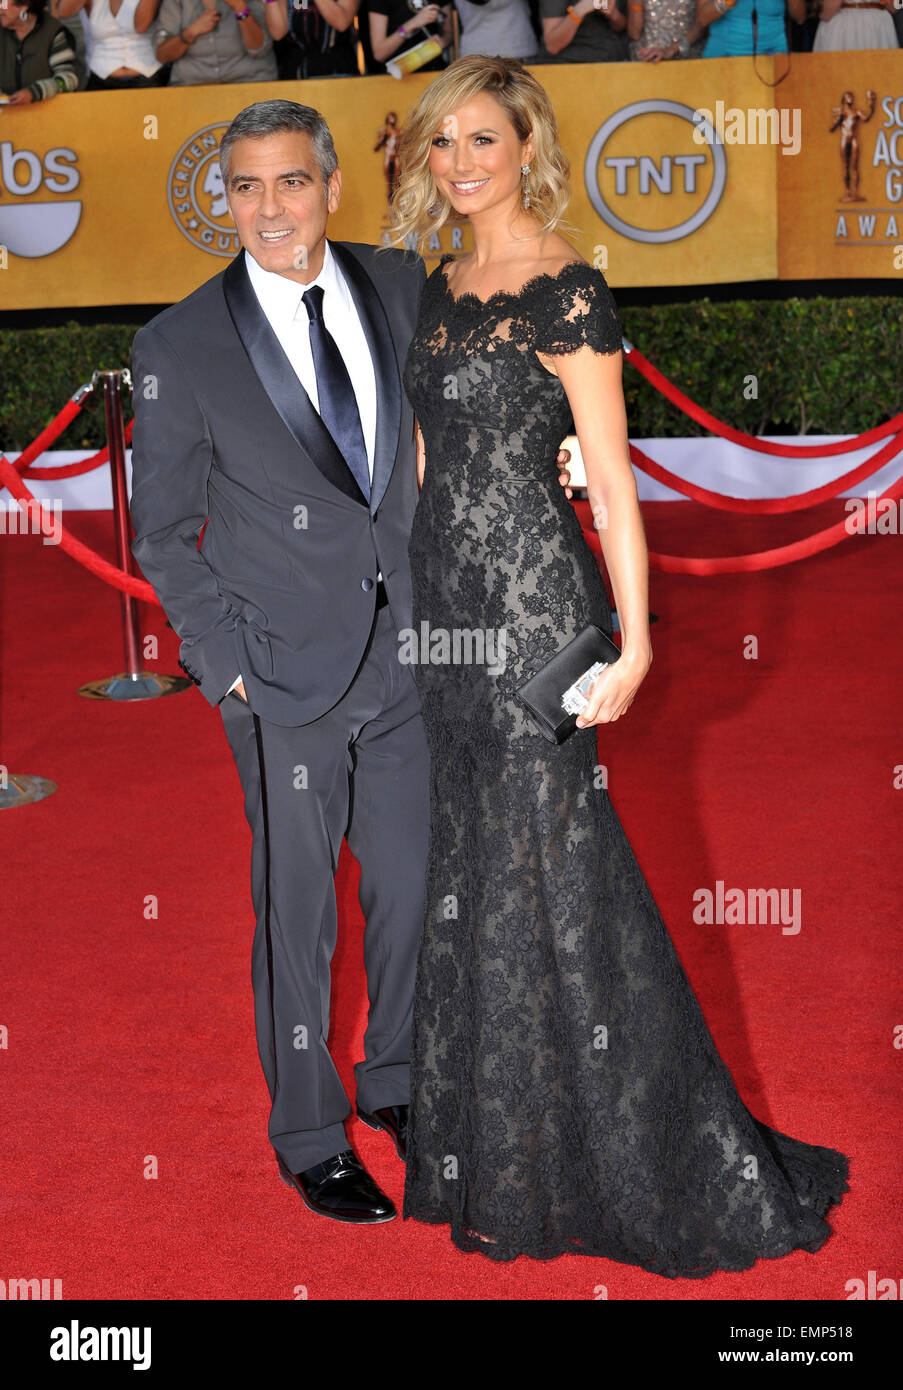 LOS ANGELES, CA - JANUARY 29, 2012: George Clooney & Stacy Keibler at the 17th Annual Screen Actors Guild Awards at the Shrine Auditorium, Los Angeles. January 29, 2012 Los Angeles, CA Stock Photo